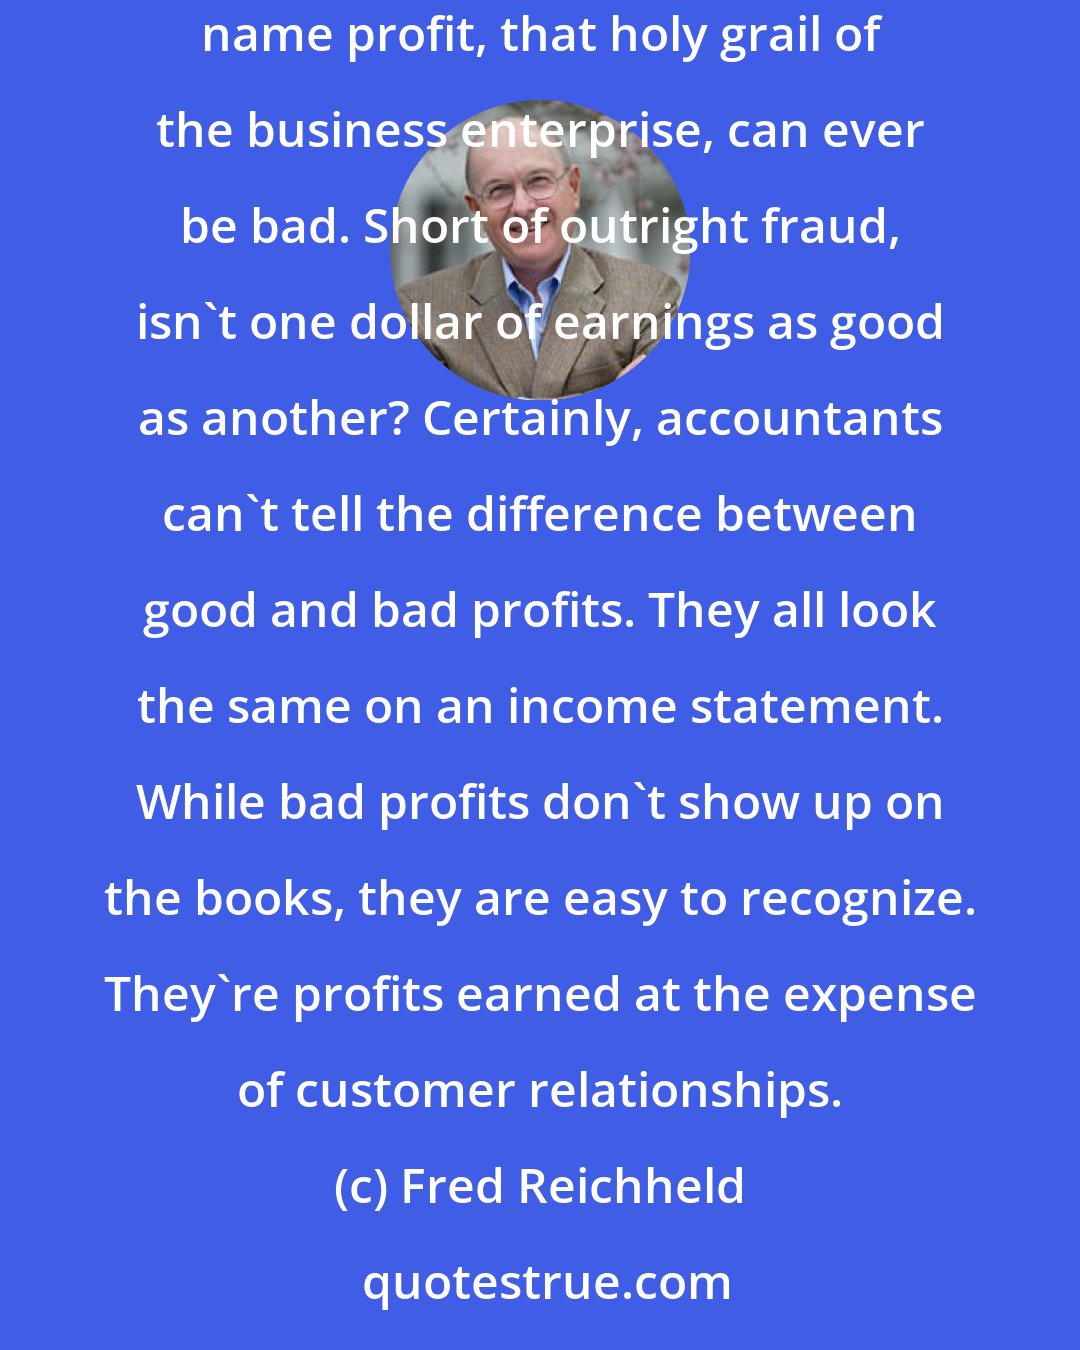 Fred Reichheld: Too many companies these days can't tell the difference between good profits and bad.... By now you're probably wondering how in heaven's name profit, that holy grail of the business enterprise, can ever be bad. Short of outright fraud, isn't one dollar of earnings as good as another? Certainly, accountants can't tell the difference between good and bad profits. They all look the same on an income statement. While bad profits don't show up on the books, they are easy to recognize. They're profits earned at the expense of customer relationships.